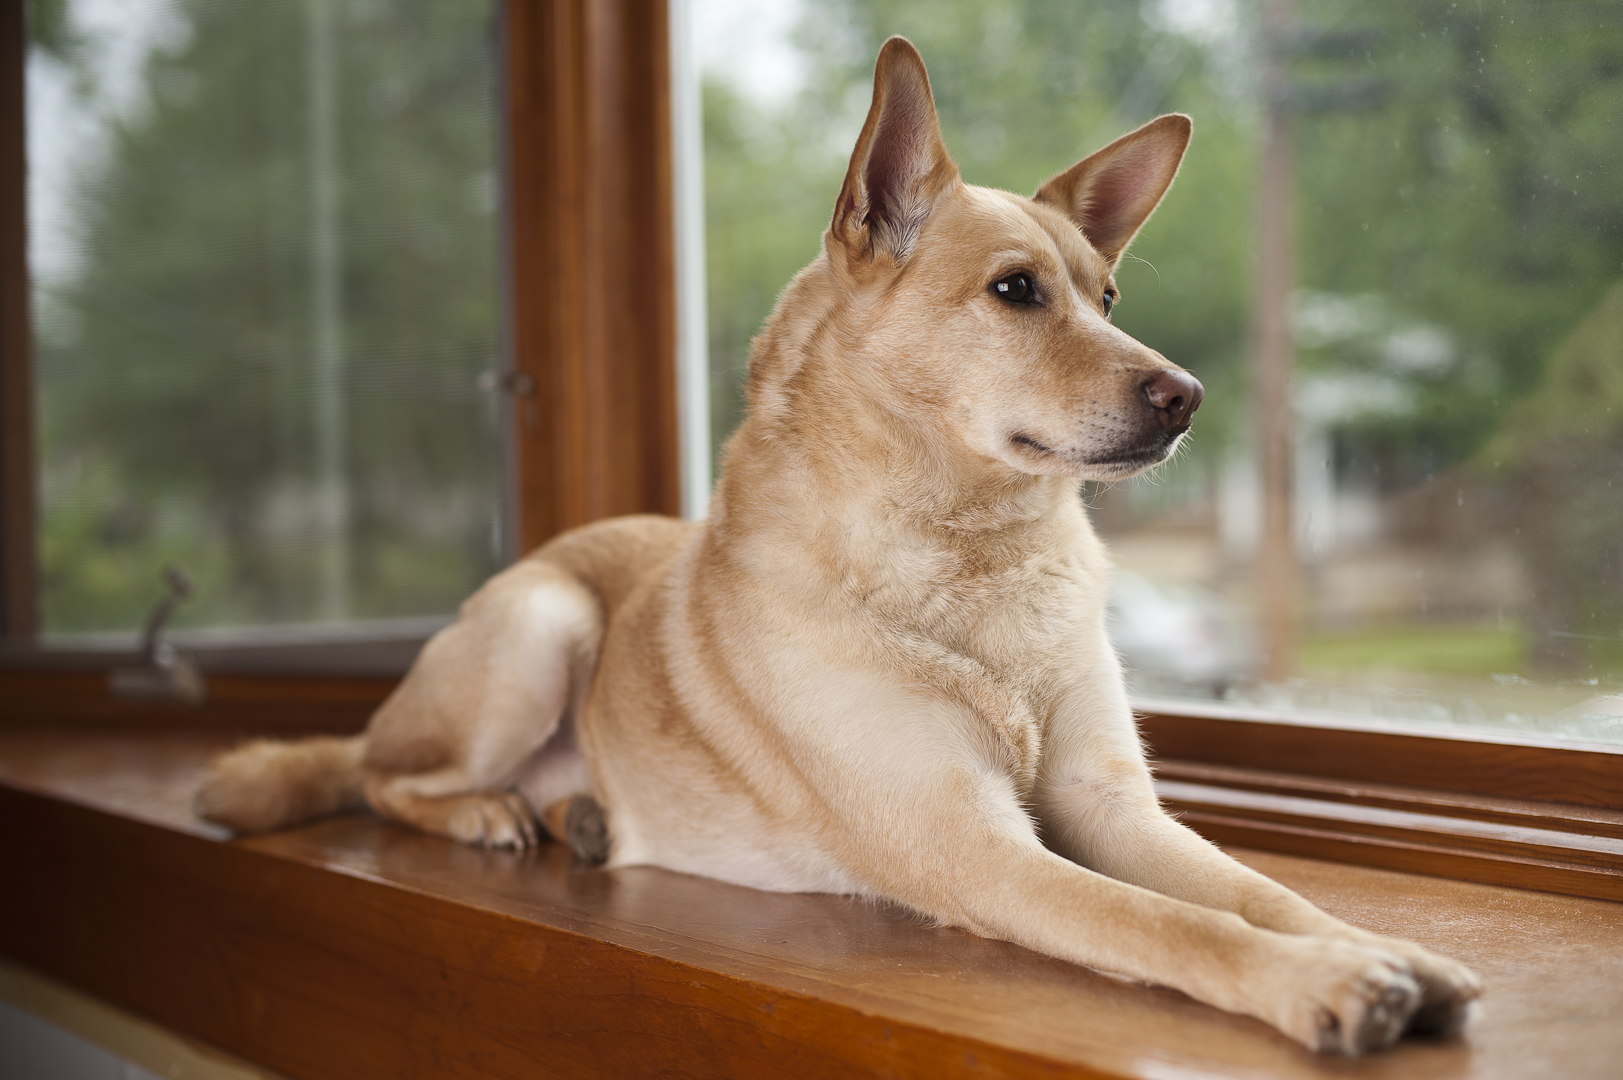 How to Make Your Home Safer for Your Pet - 